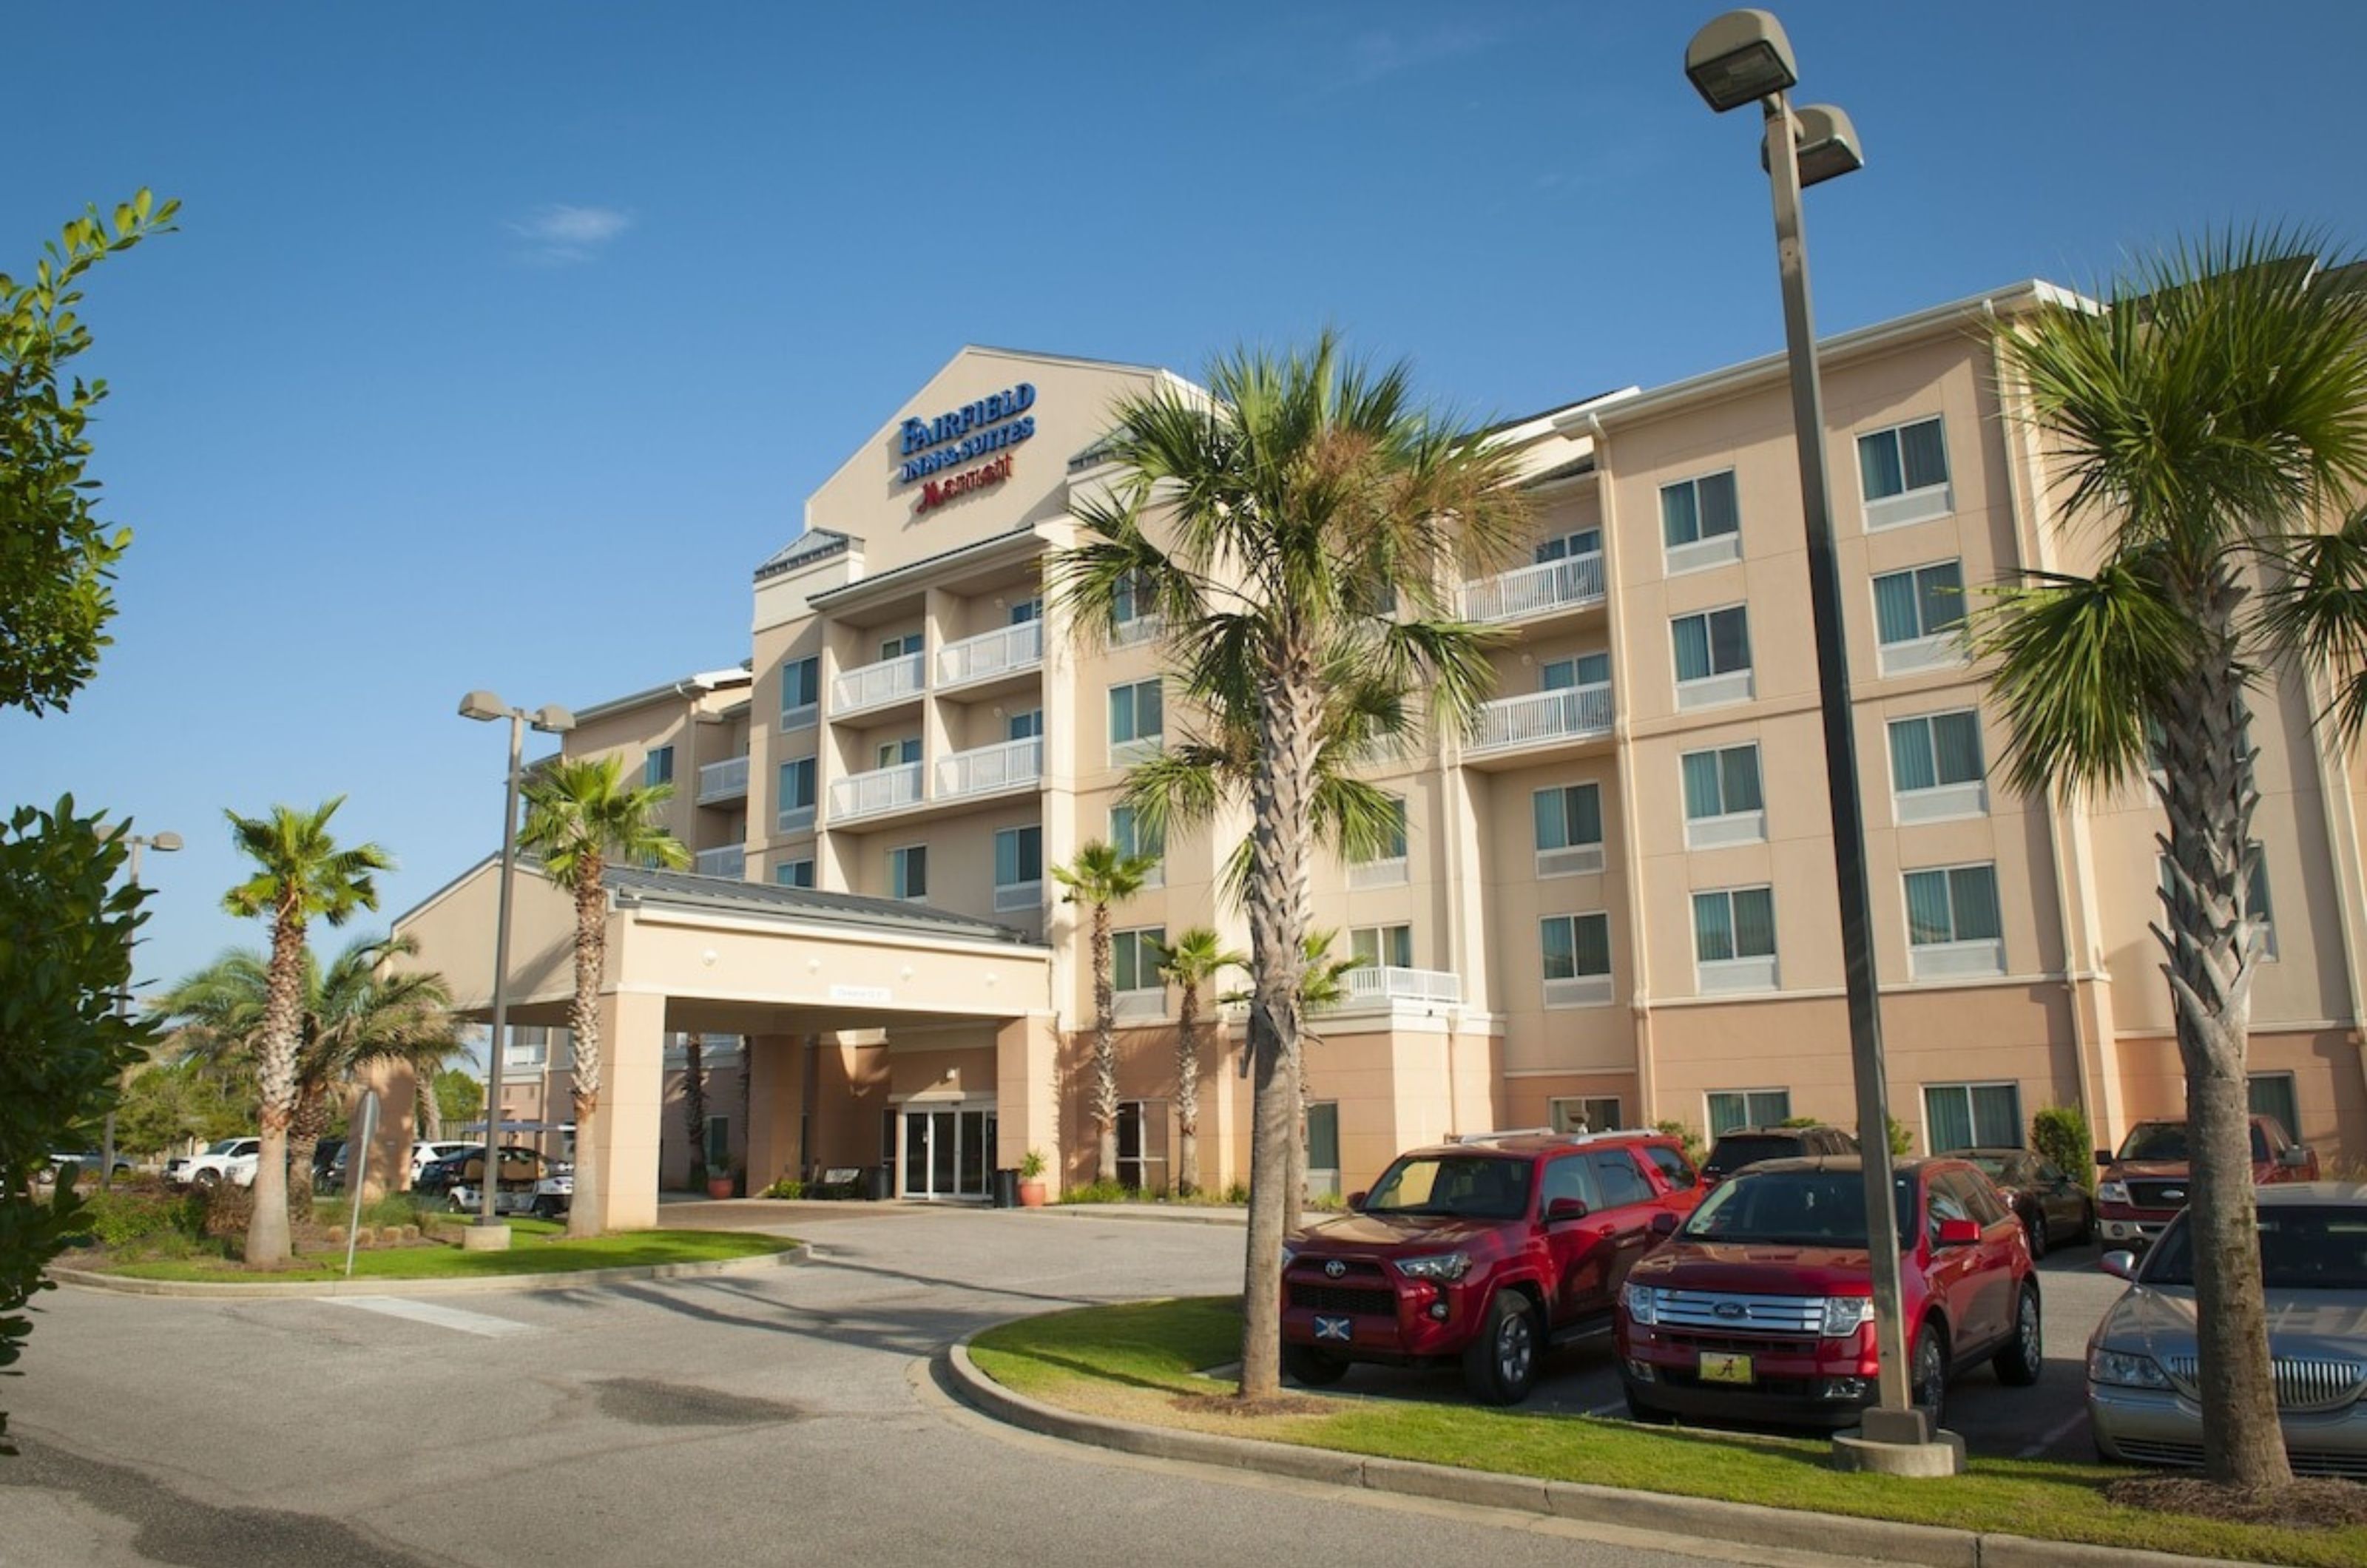 View of the parking lot and the entrance to Fairfield Inn and Suites in Orange Beach Alabama 